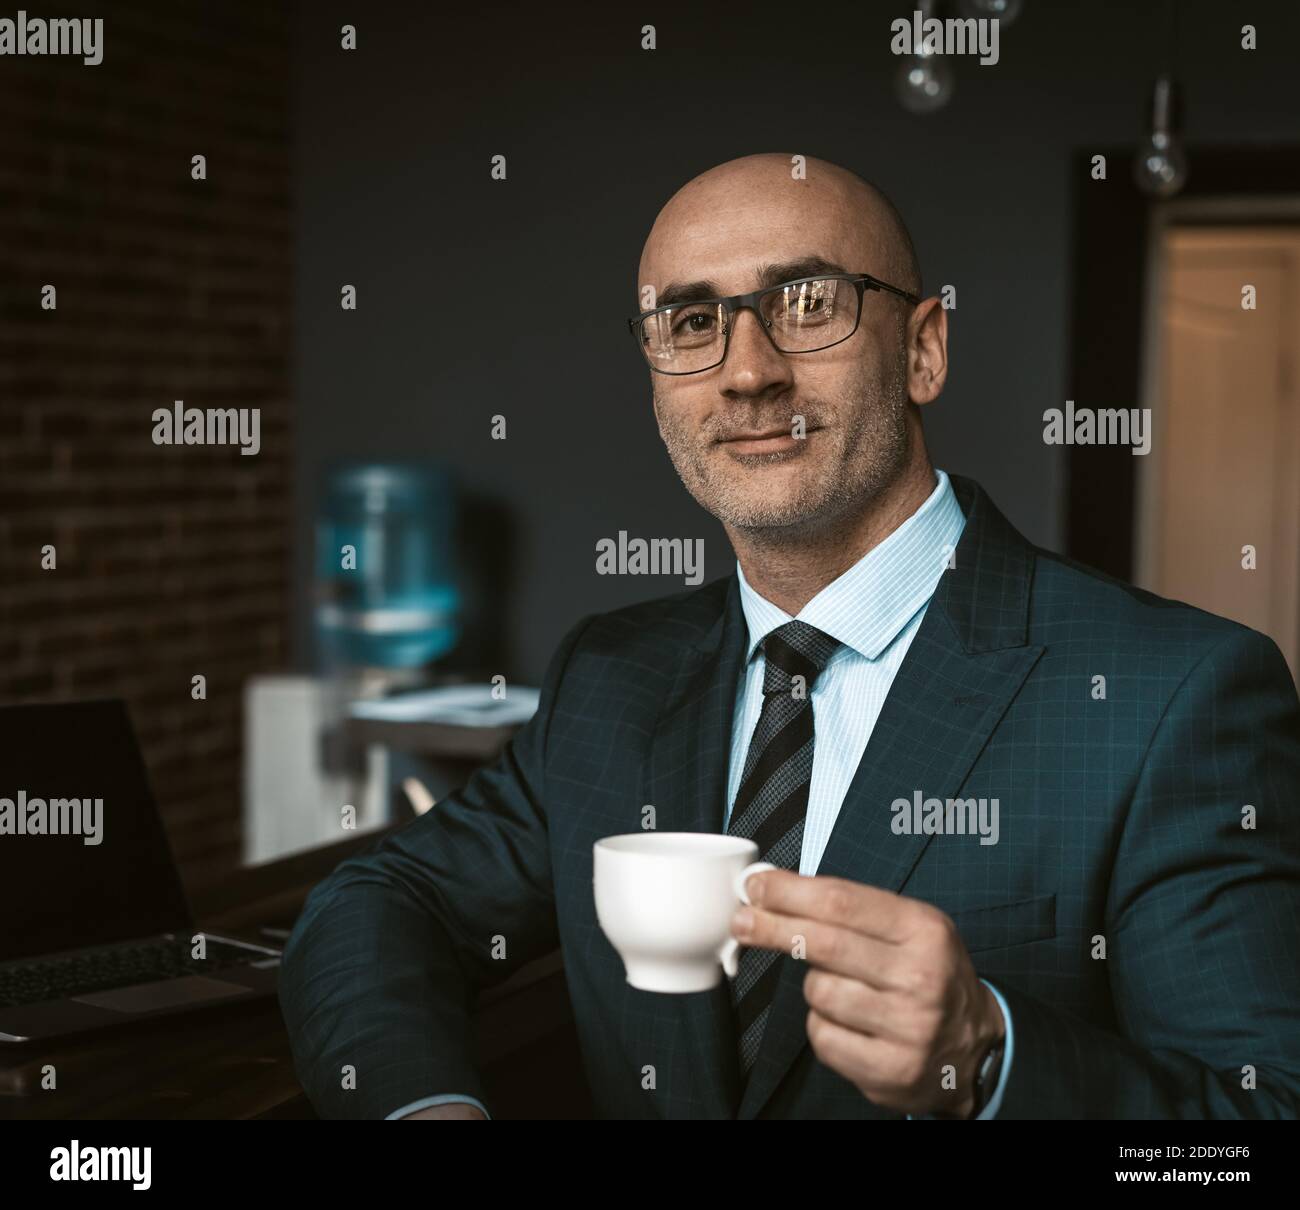 Mature business man in a business suit, holding a cup of coffee in a office building cafeteria having and looking at camera wearing expensive suit and Stock Photo